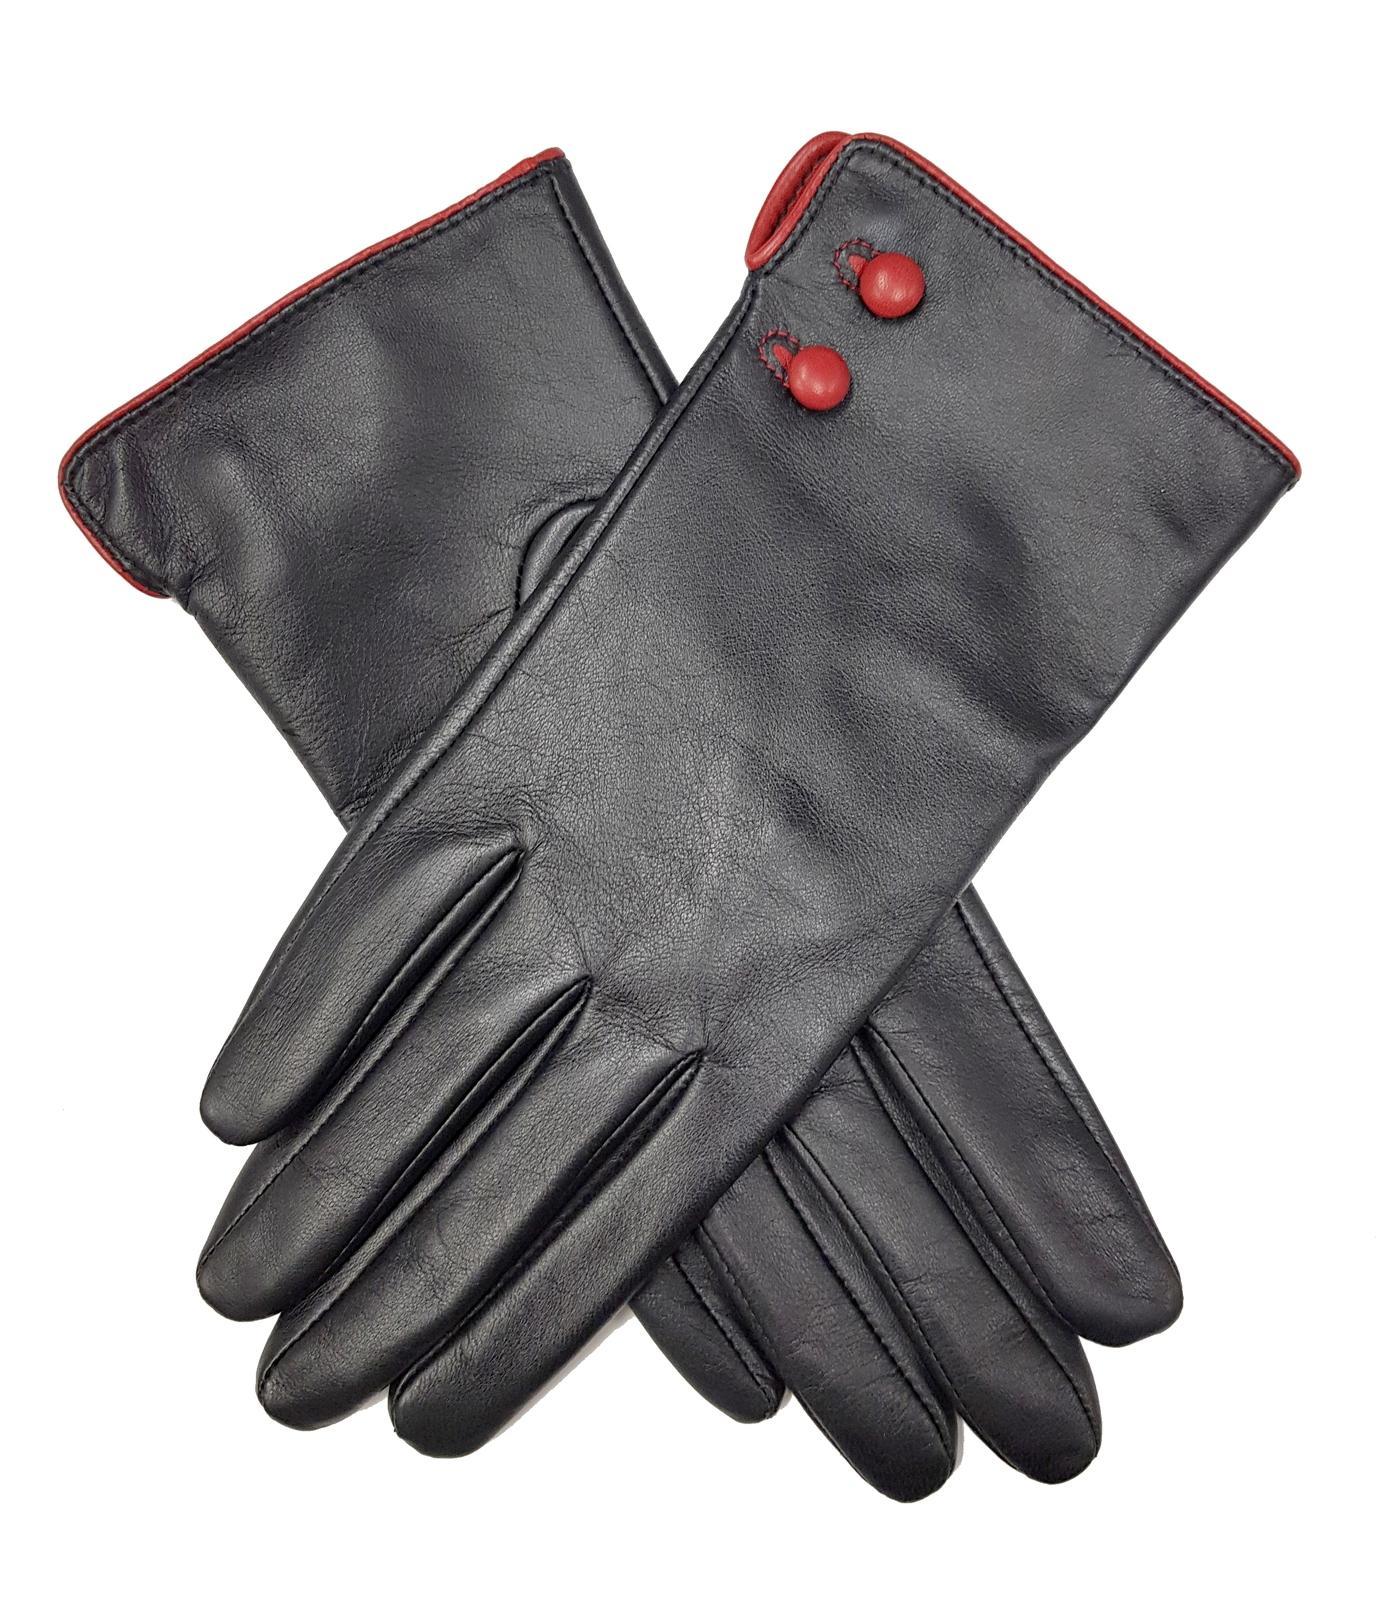 Leather Gloves with Contrast Buttons and Cuff - Black/Red - Large